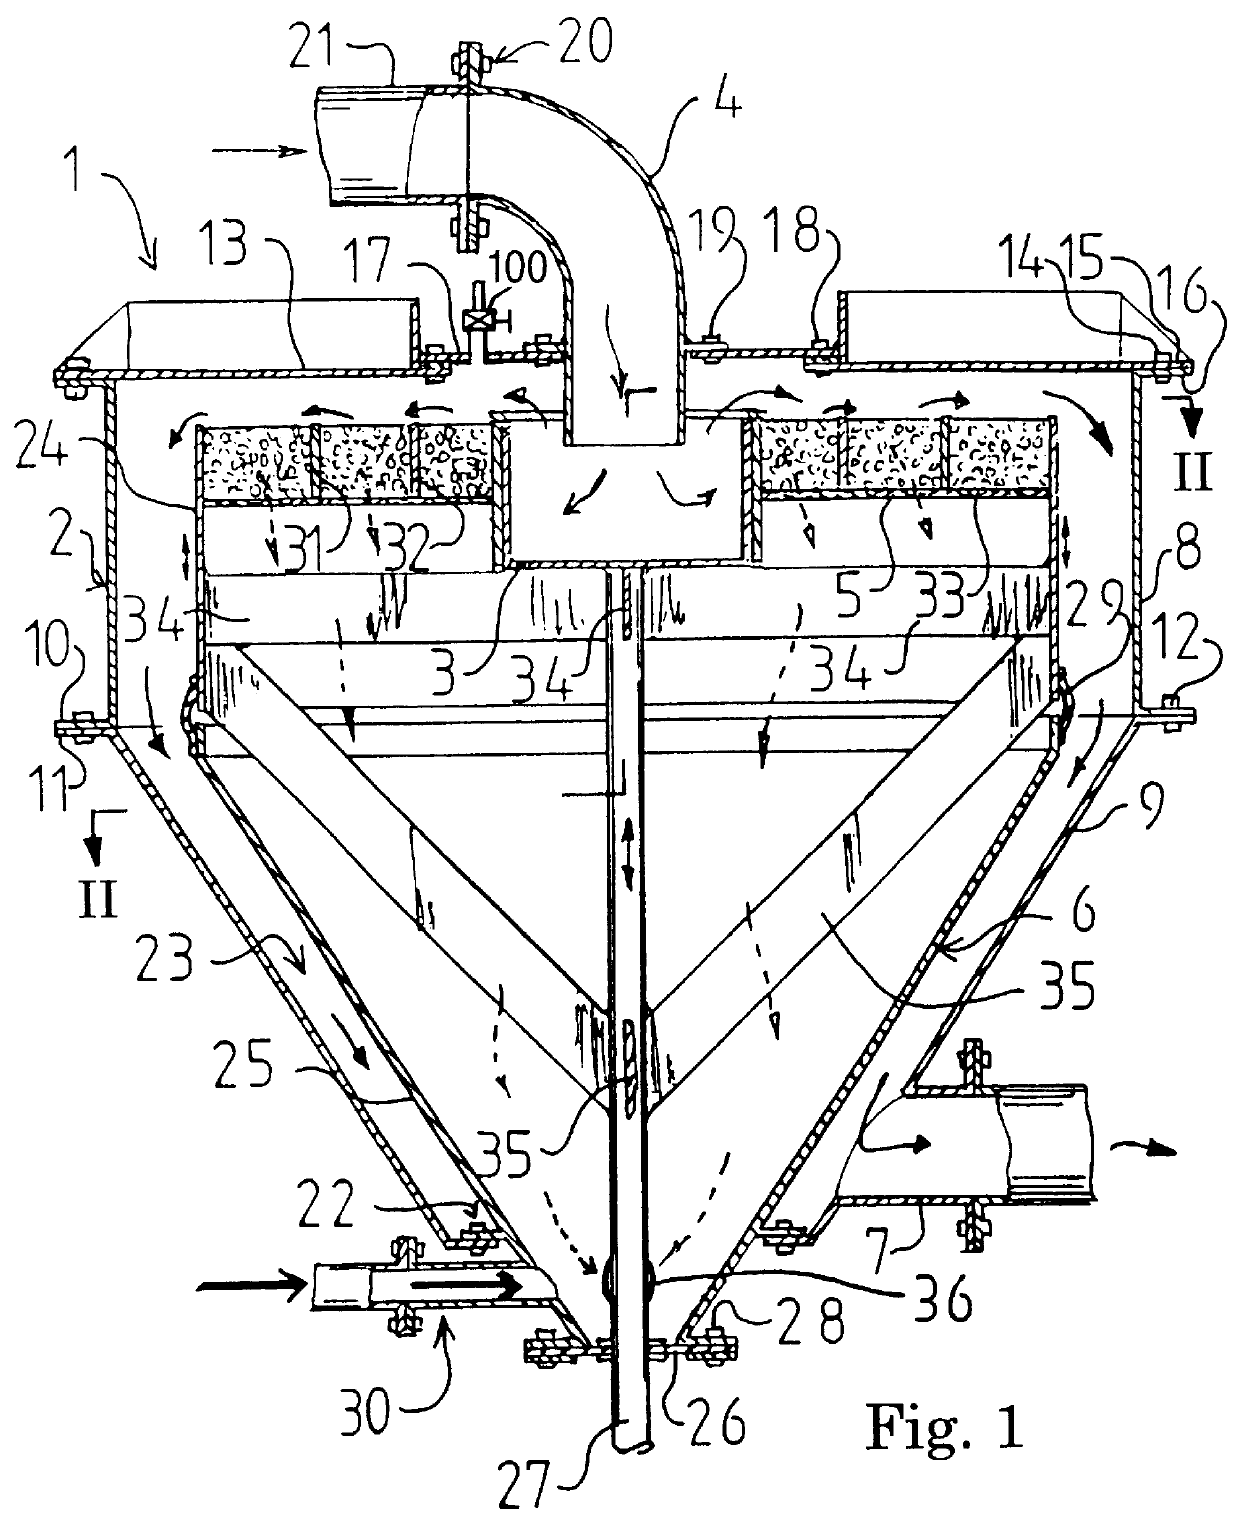 Separator for separating particles from a slurry